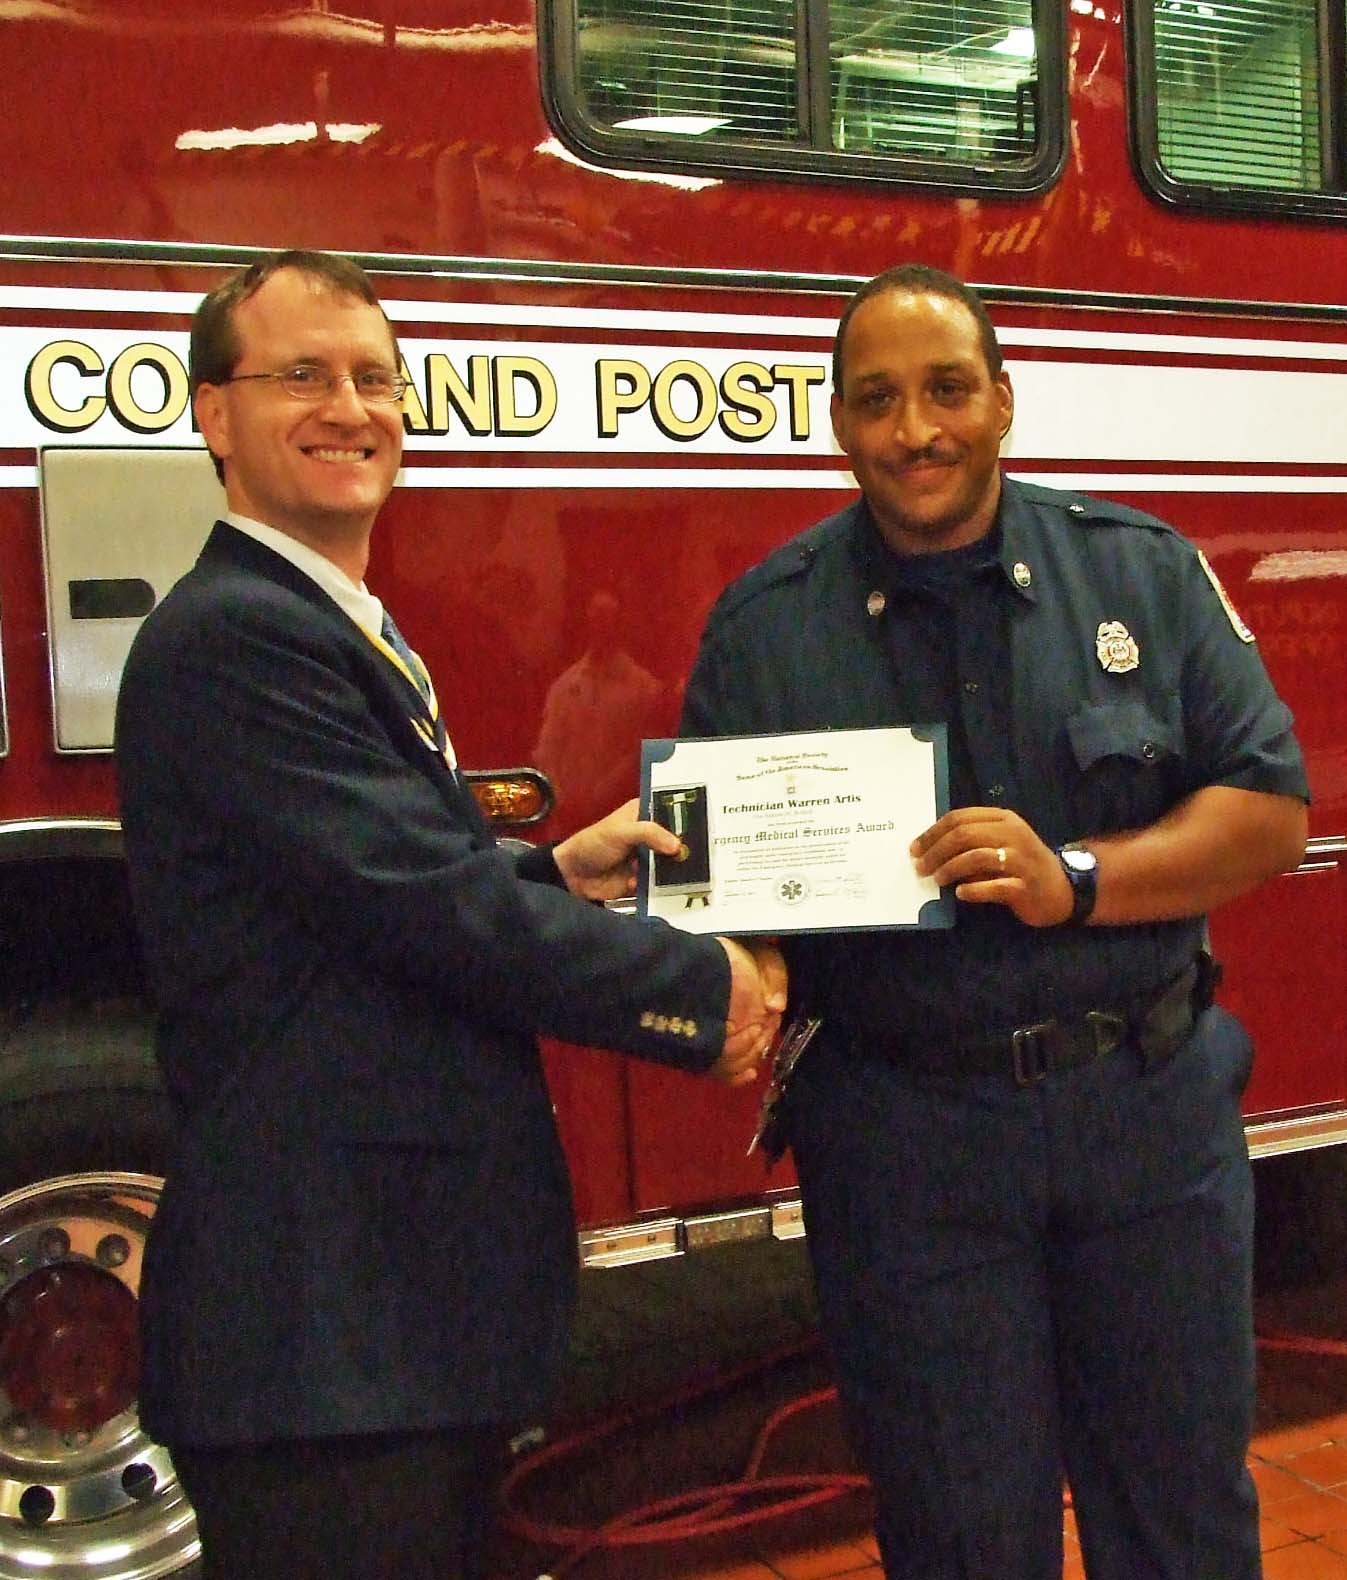 Warrn Artis receives the Fairfax Resolves EMS Commendation from Chapter President Darrin Schmidt. The station's mobile command post vehicle serves as a backdrop.